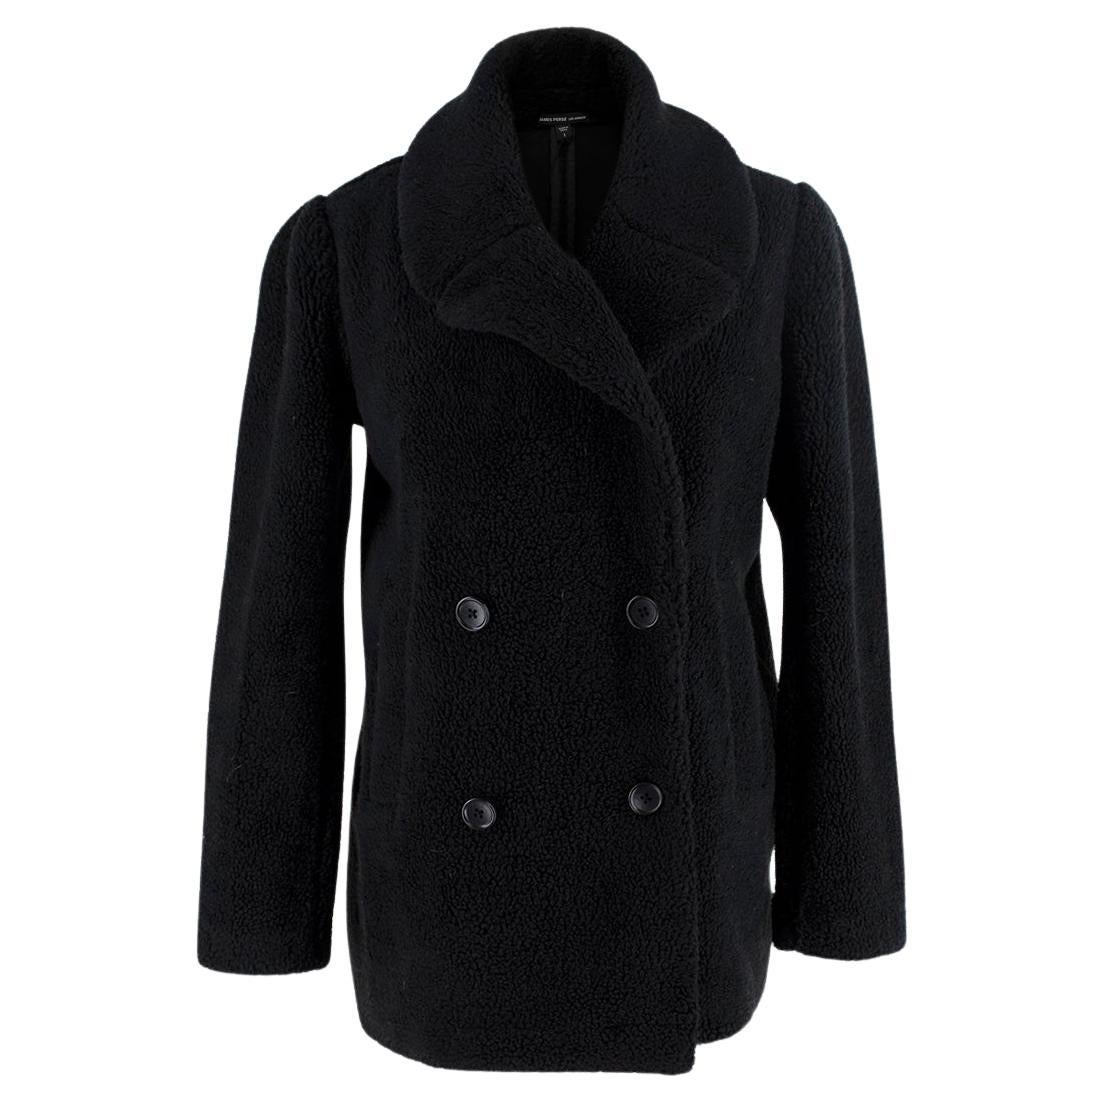 James Perse Sherpa Black Double Breatsed Peacoat - US 4-6 For Sale